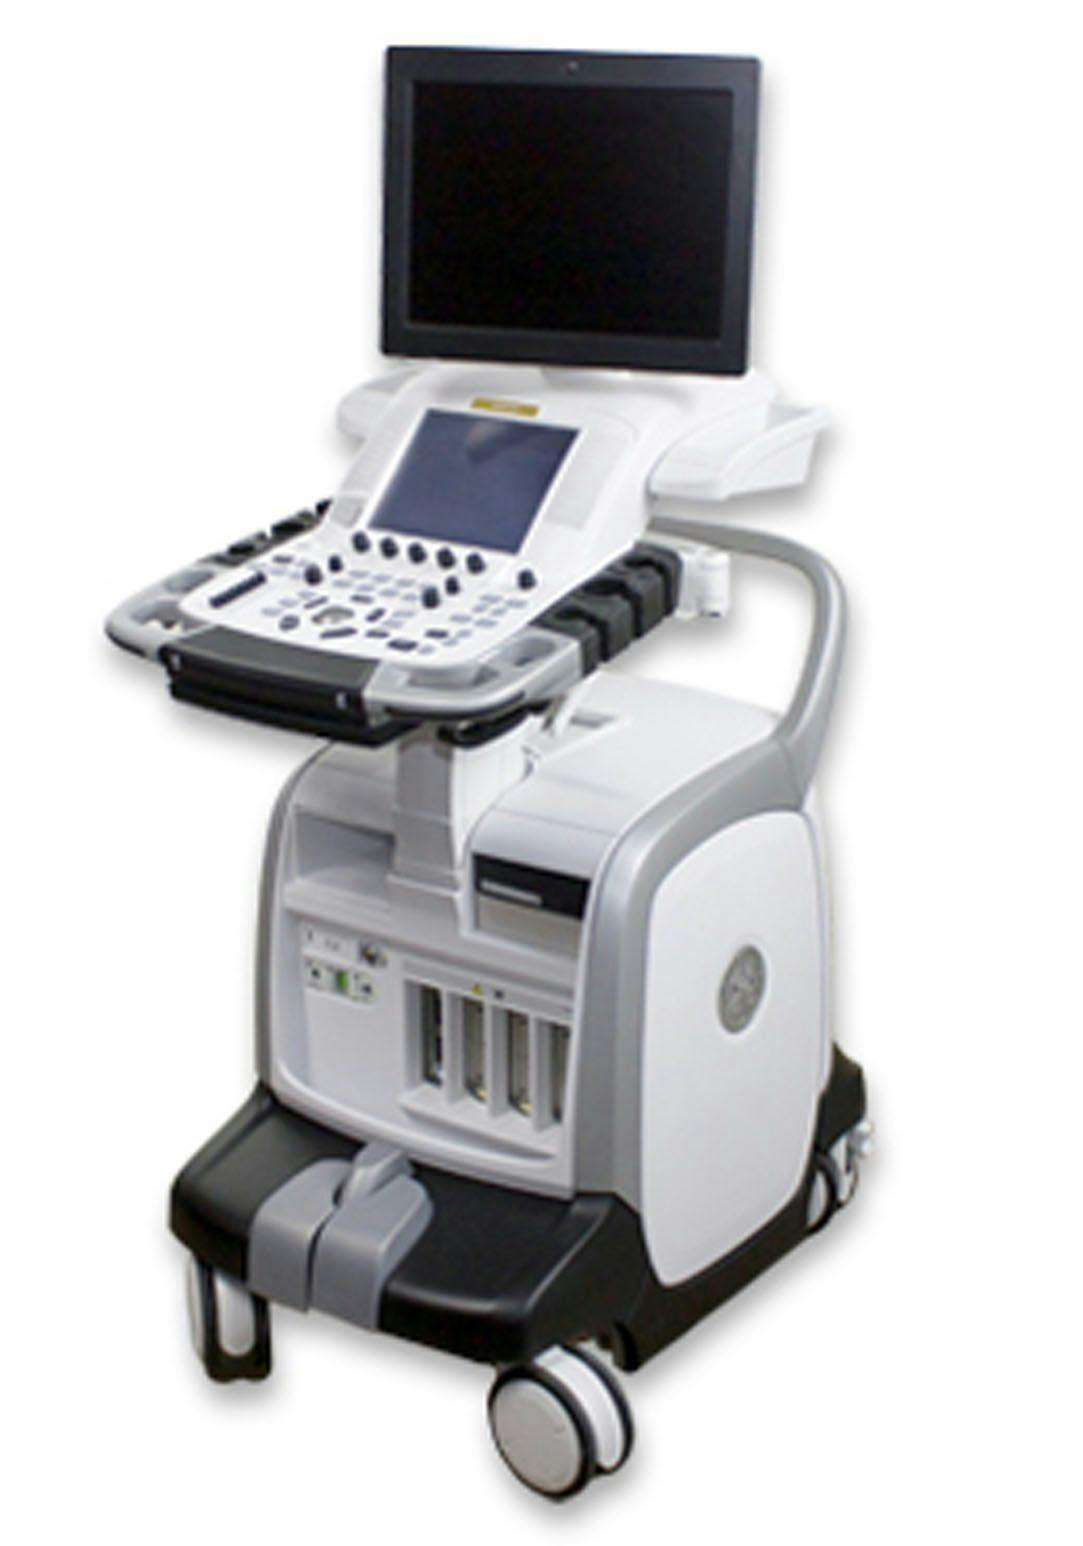 Ultrasound Differentiates Complicated, Uncomplicated Appendicitis